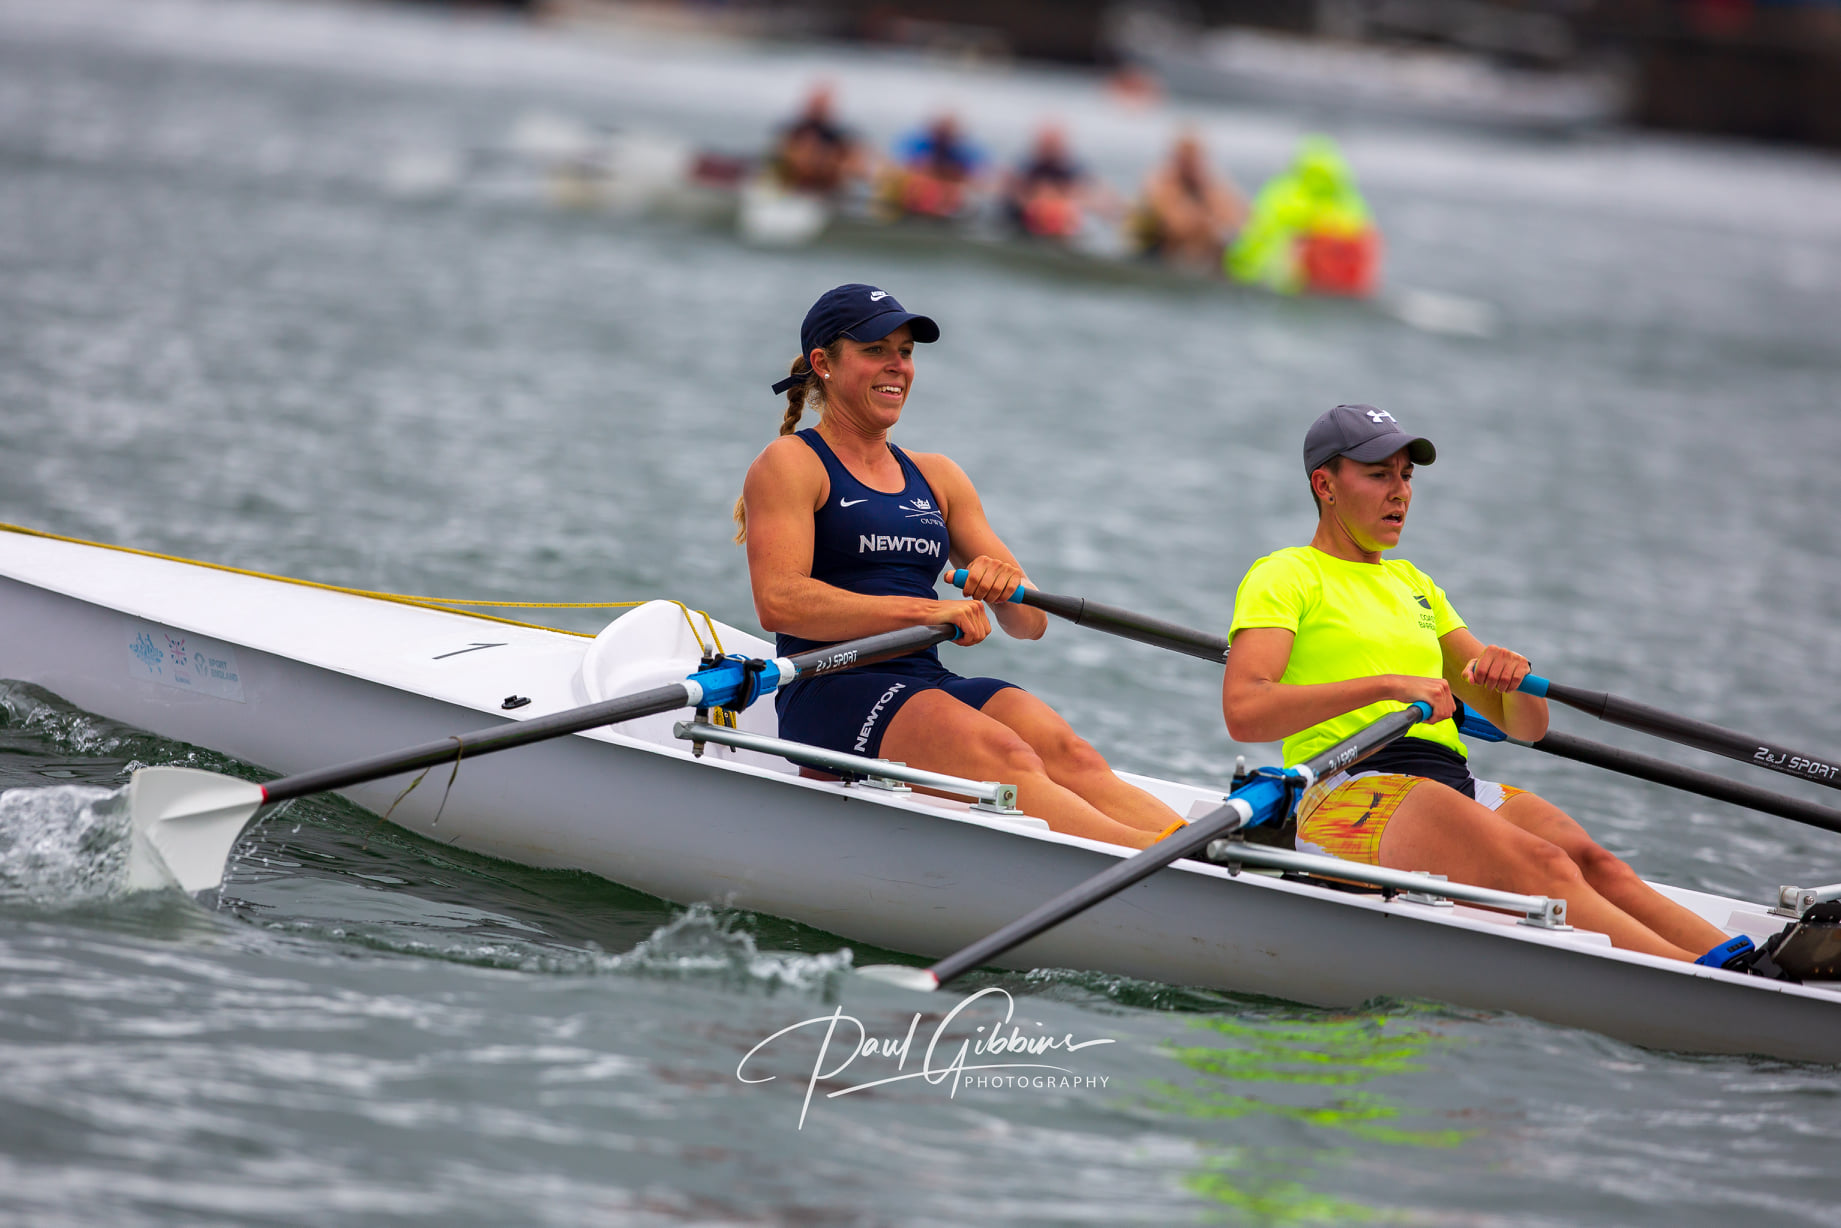 Racing Complete at USRowing’s 2023 Winter Speed Order